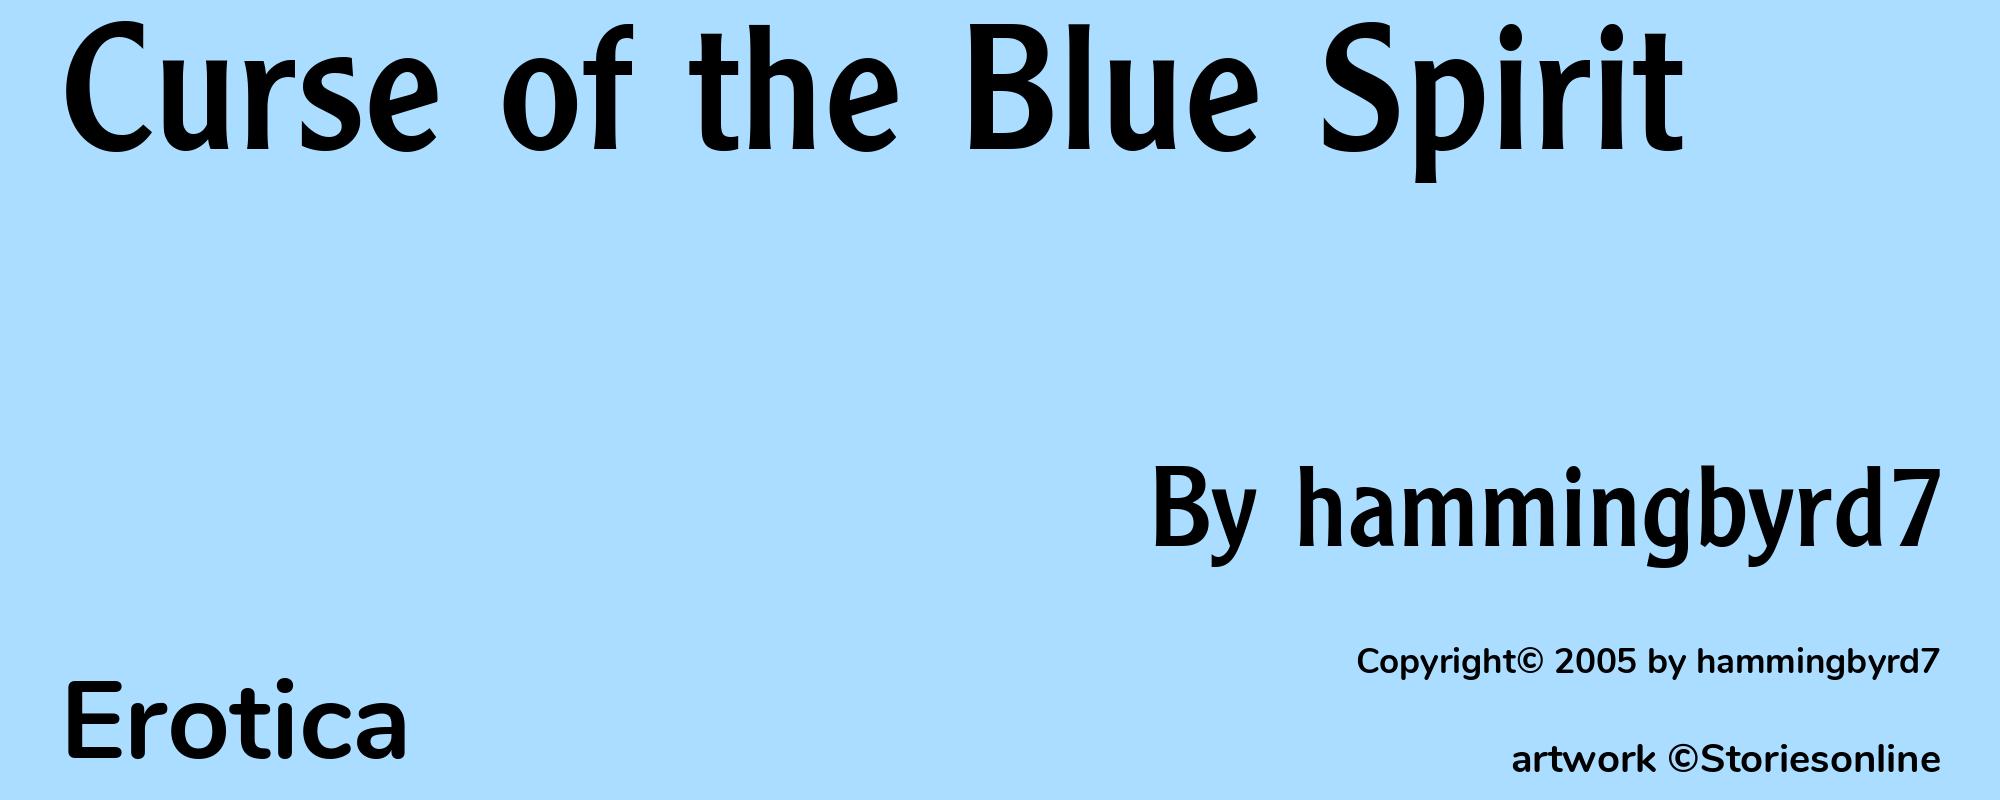 Curse of the Blue Spirit - Cover